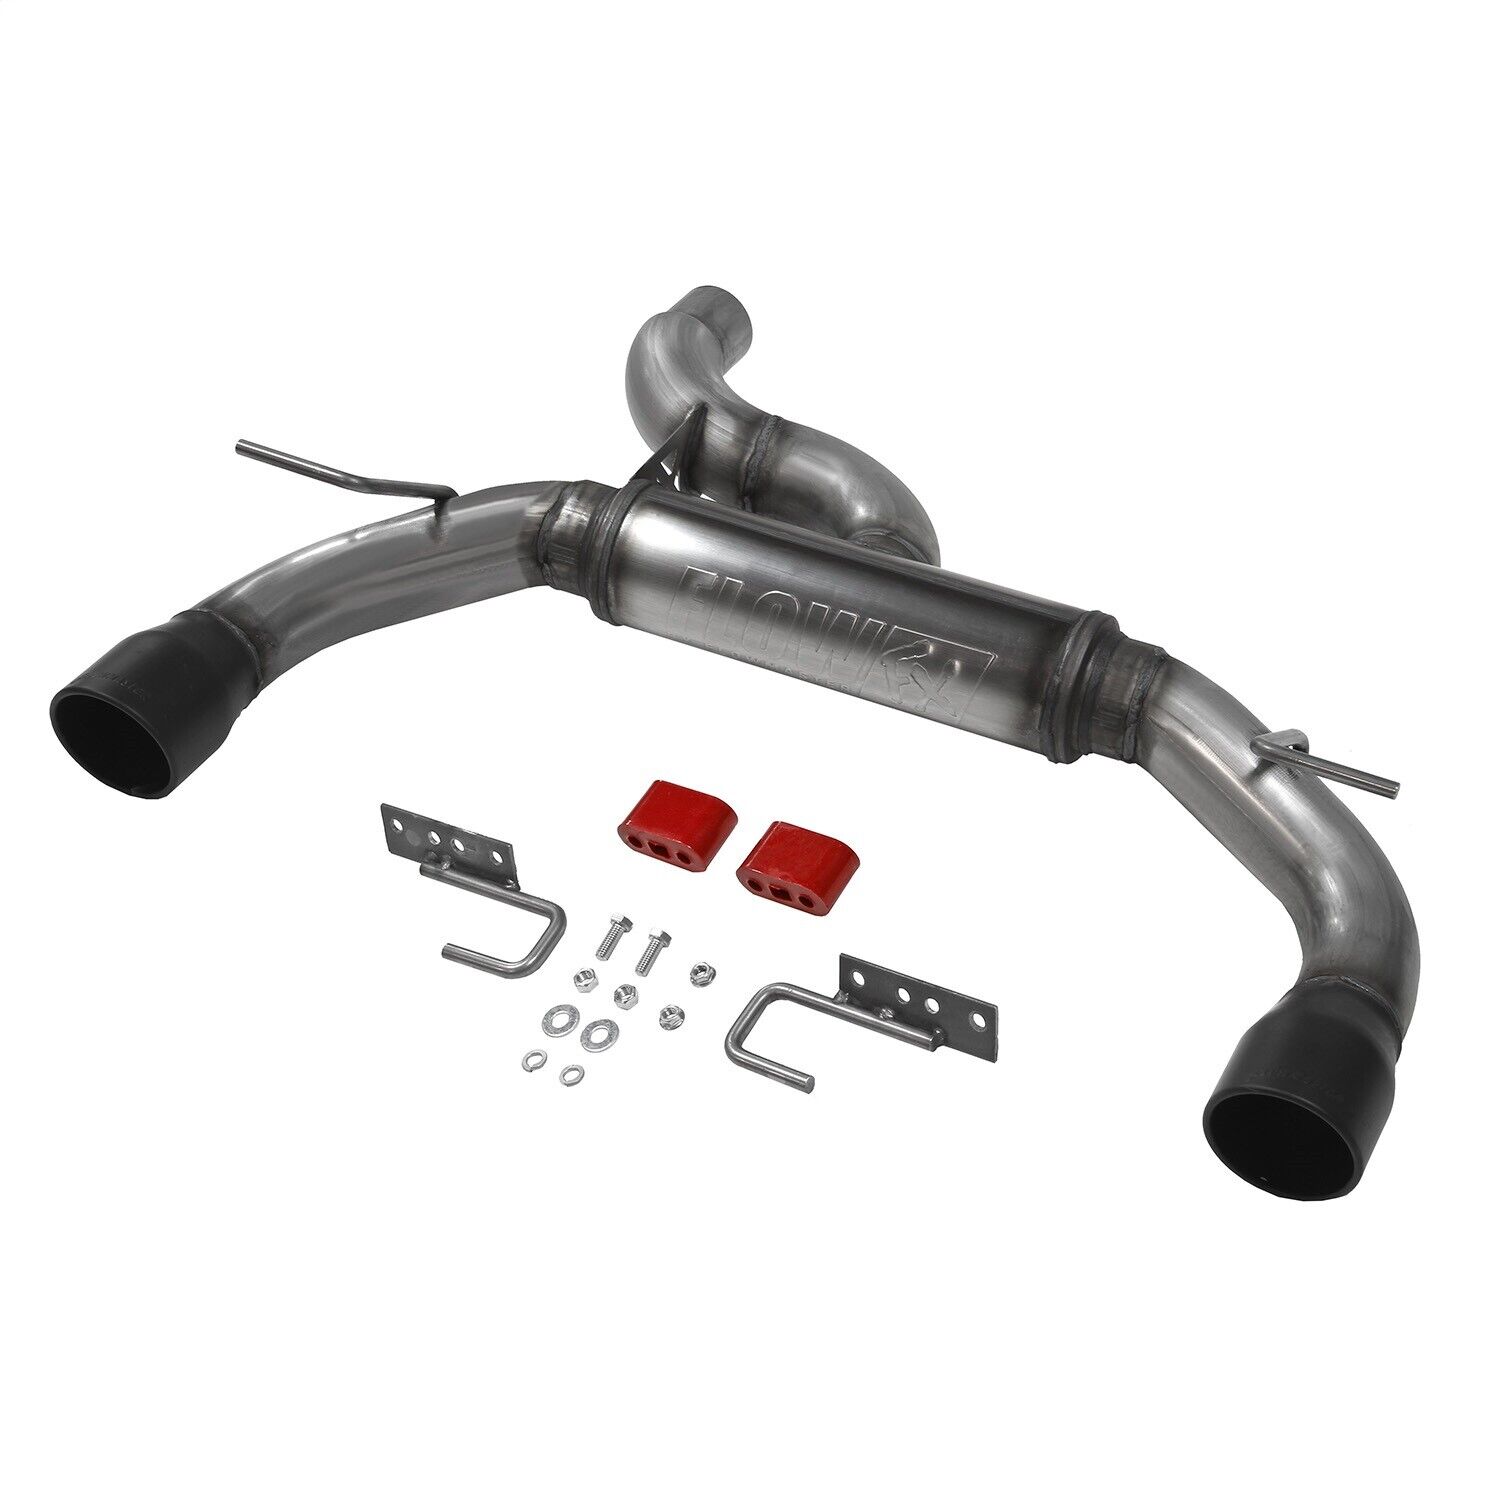 Flowmaster 718123 FlowFX Axle Back Exhaust System Fits 21-22 Bronco